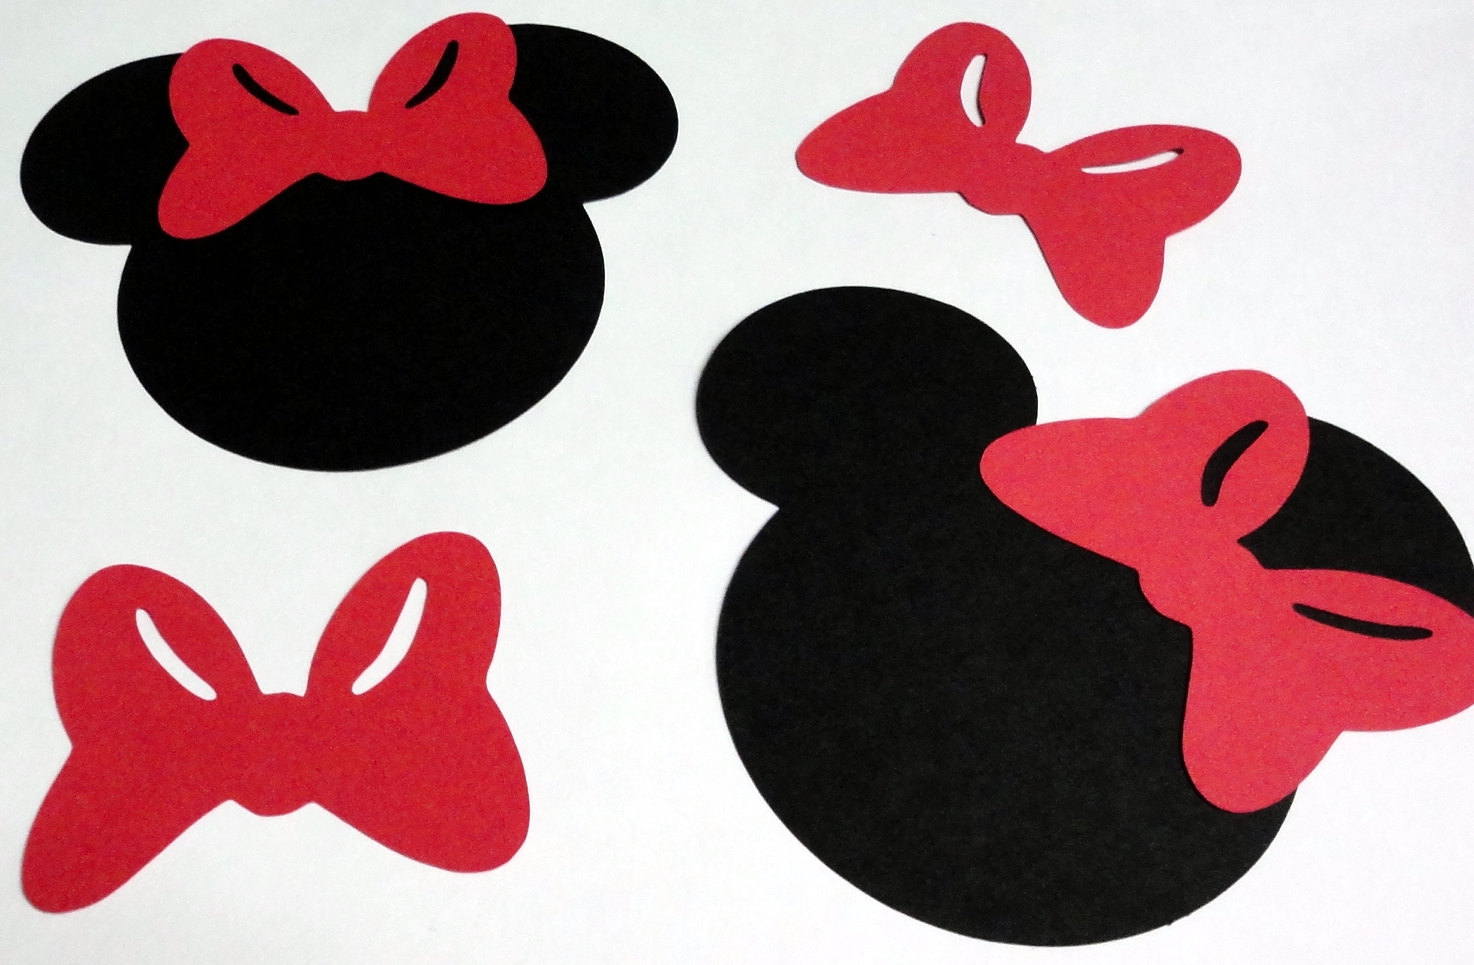 50 5 Minnie Mouse Head Silhouettes Black by StartedByAMouse1928